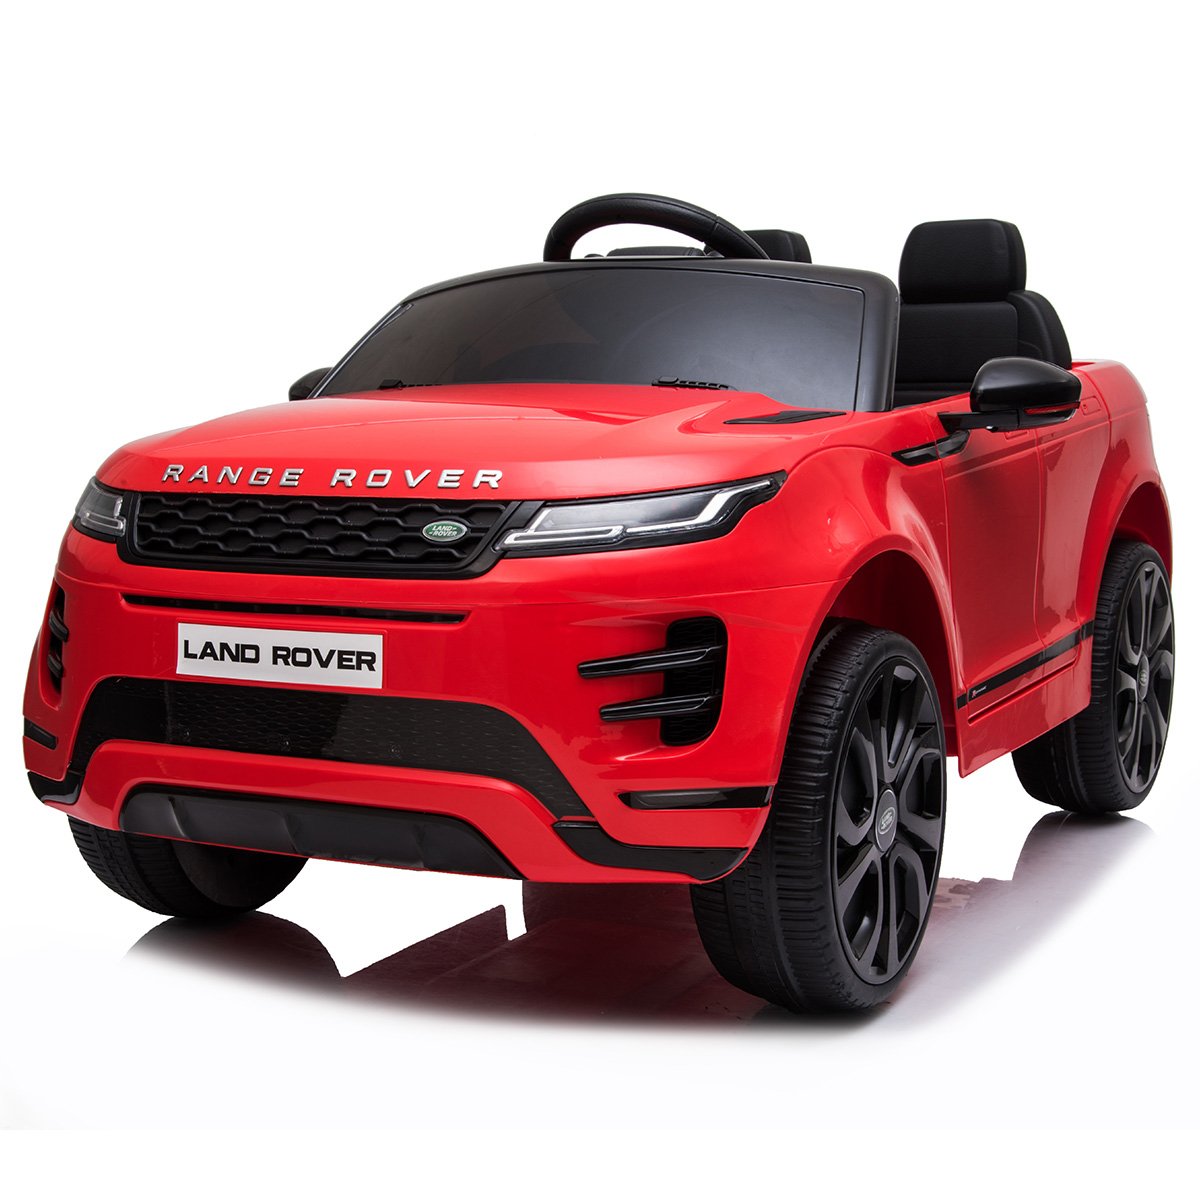 Land Rover Licensed Kids Electric Ride On Car Remote Control - Red 1